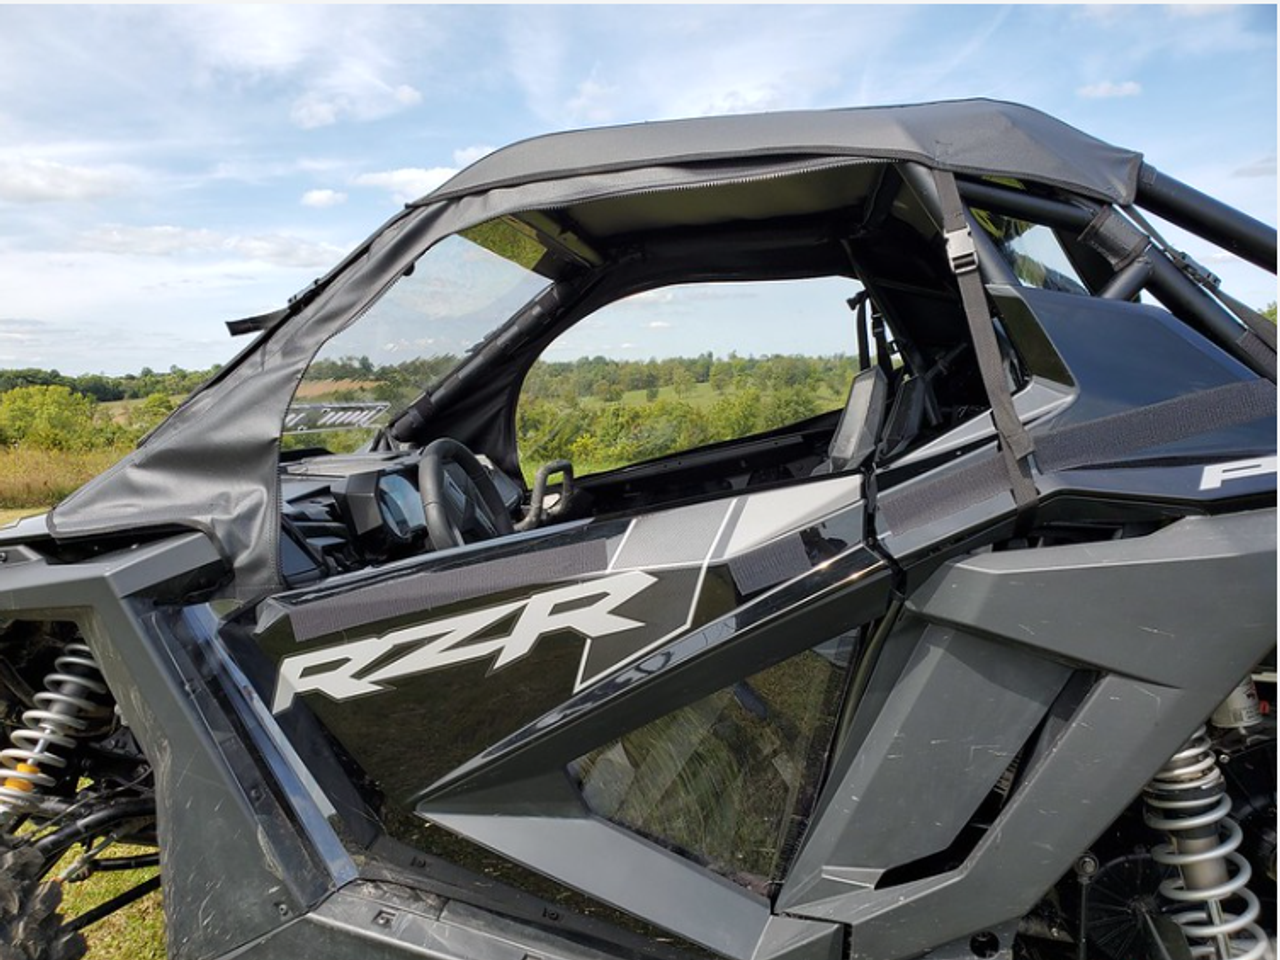 3 Star side x side accessories Polaris RZR Pro XP/Turbo R doors and rear window side angle view